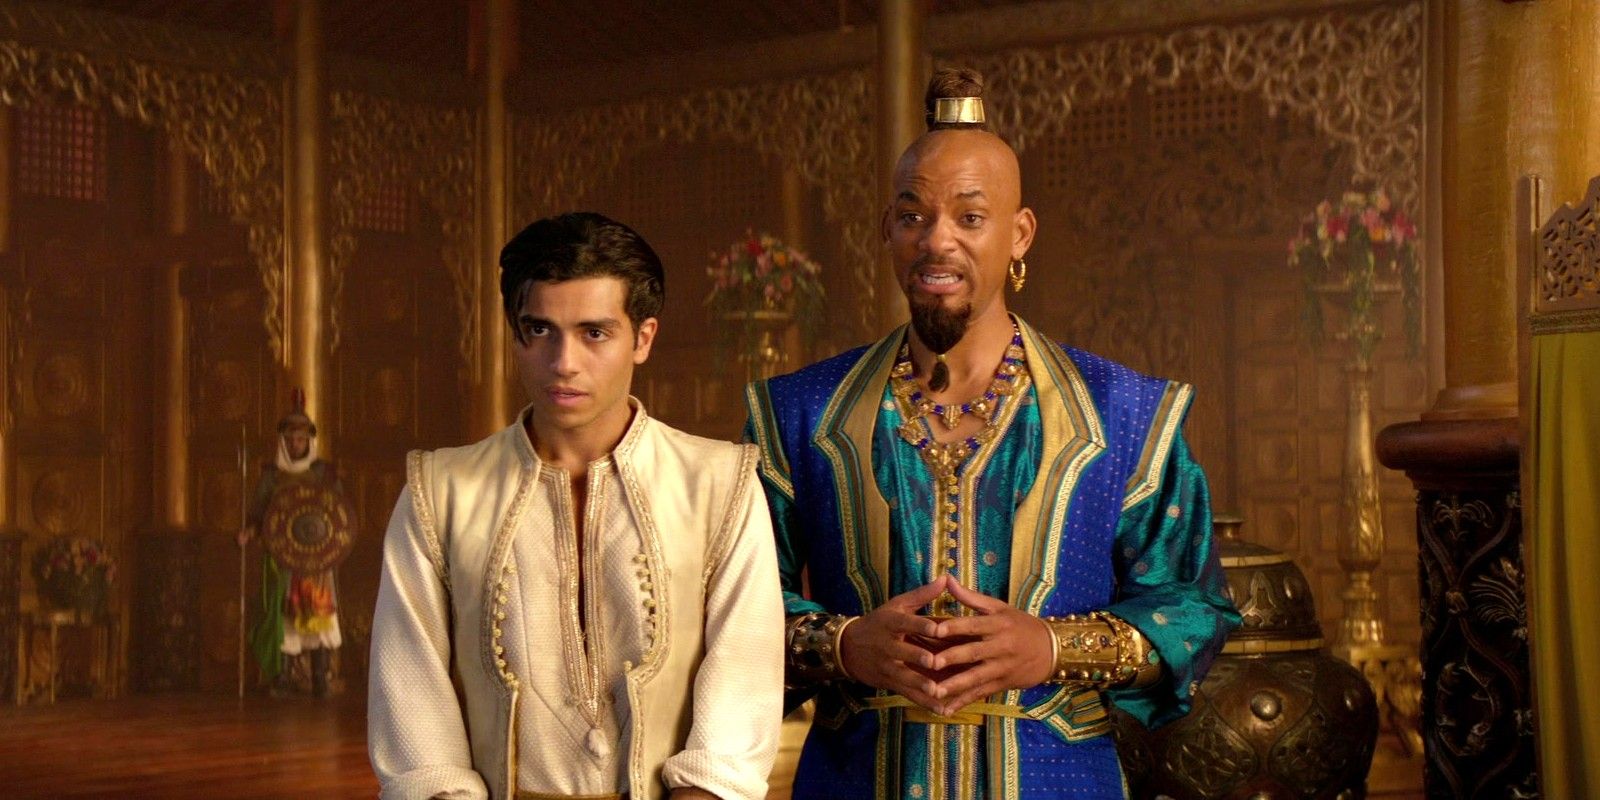 Aladdin and Genie face up to Jasmine and her father in Aladdin